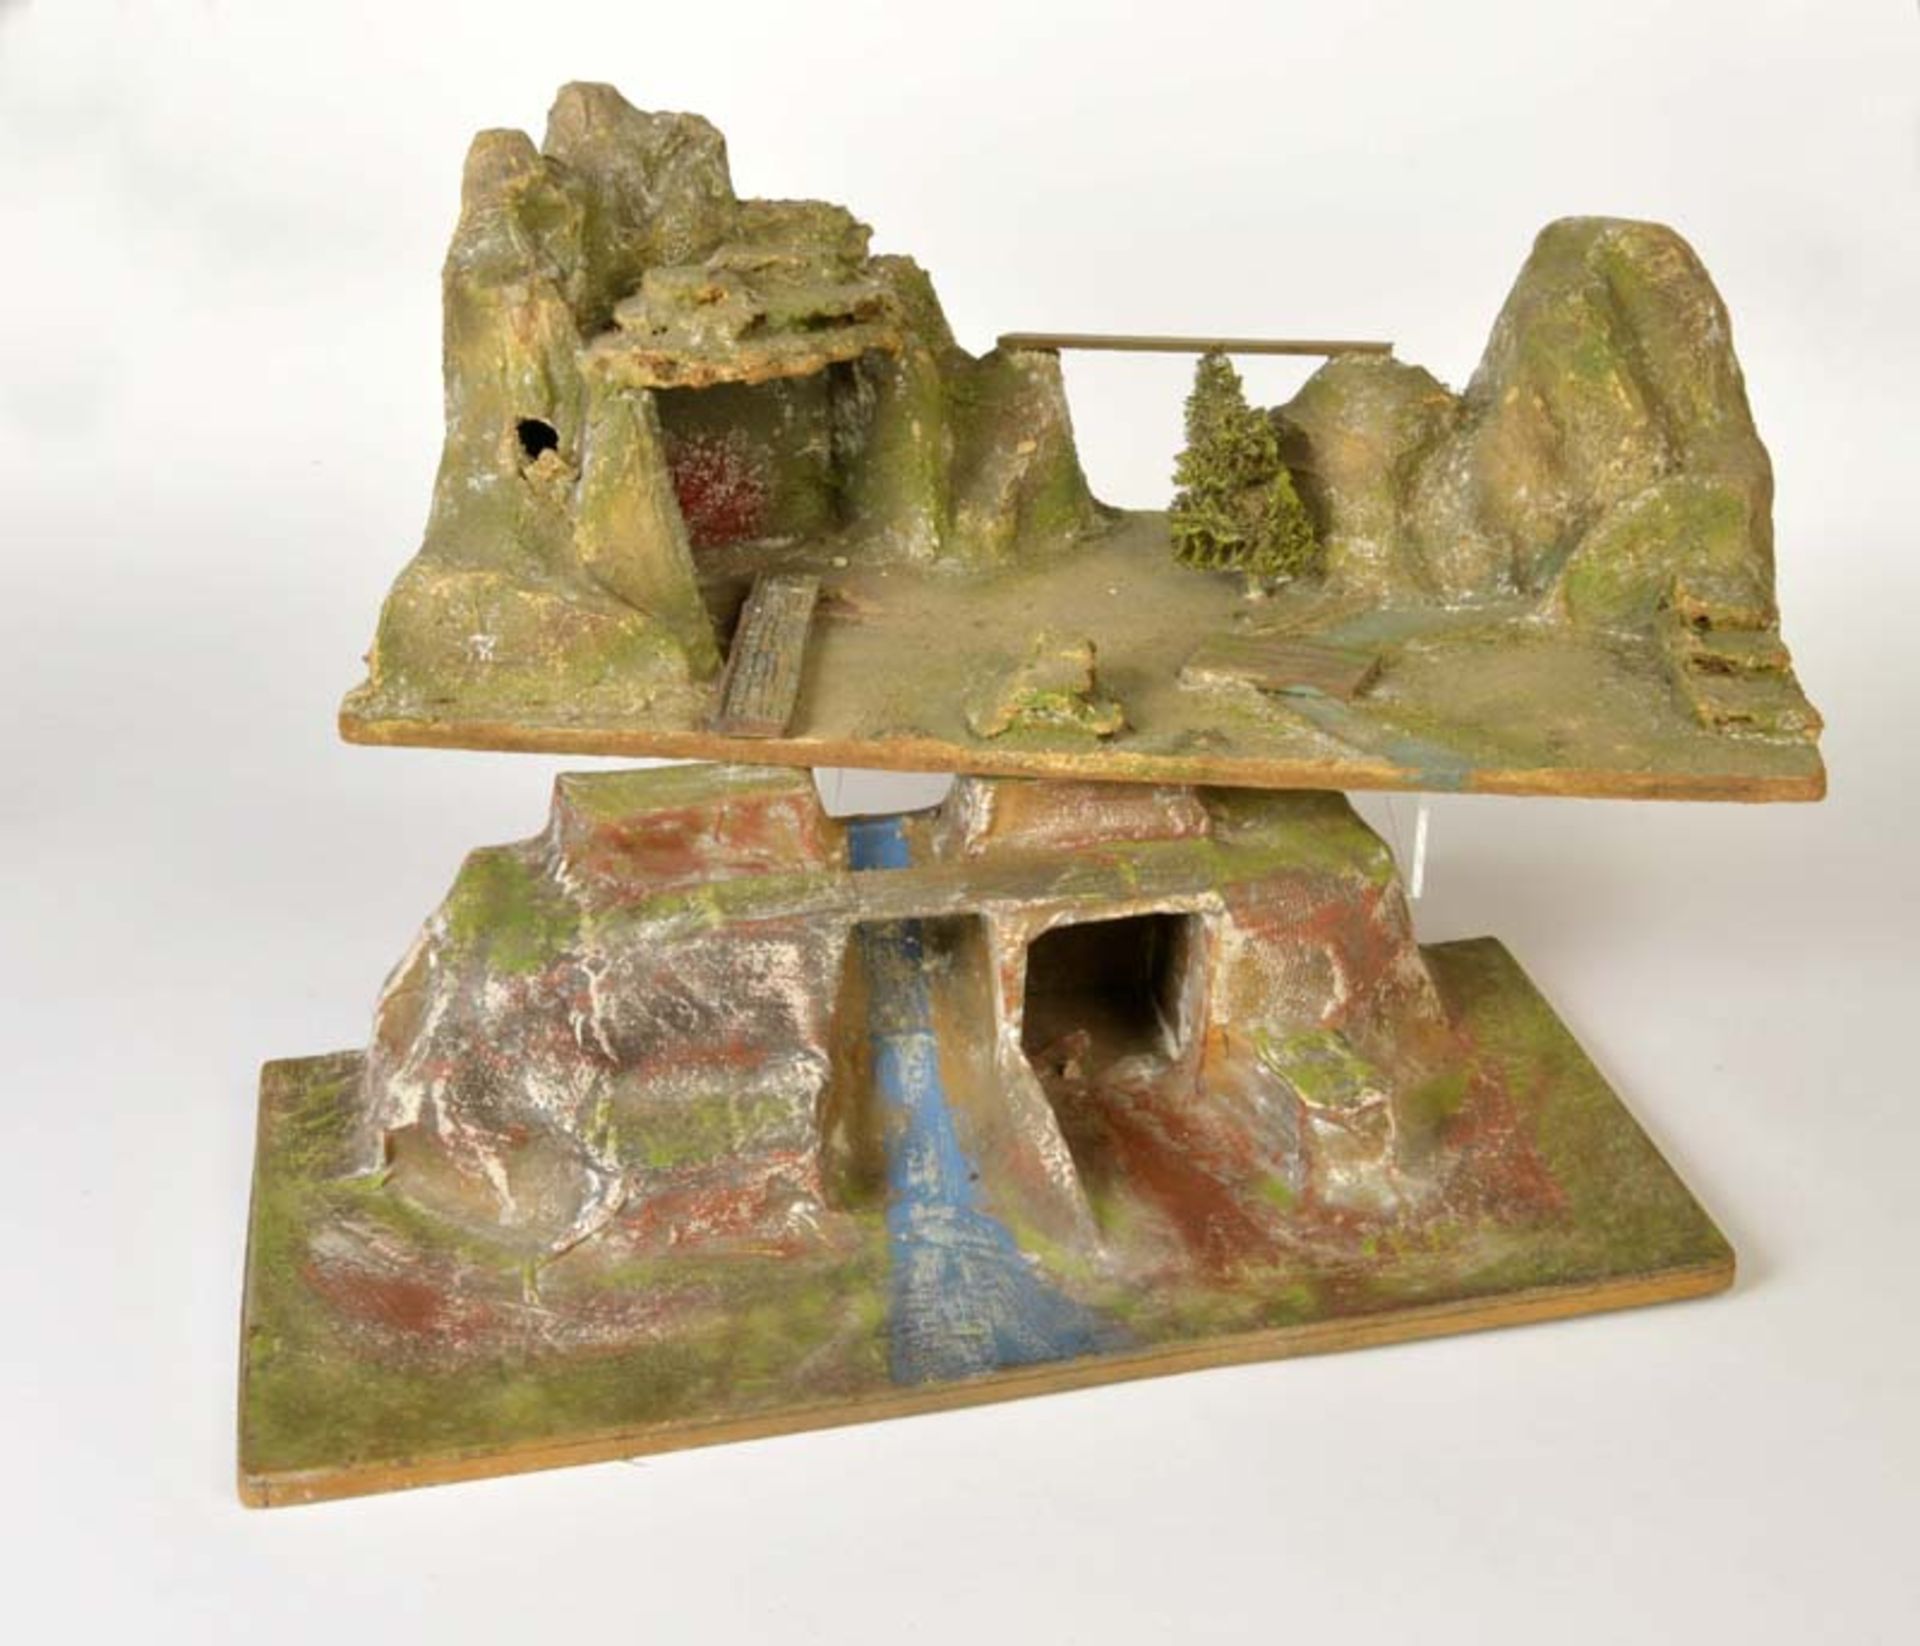 2 Wild West Areas (Dioramas), wood + paper mache, 1x damaged on left side, traces of age, C 2-32